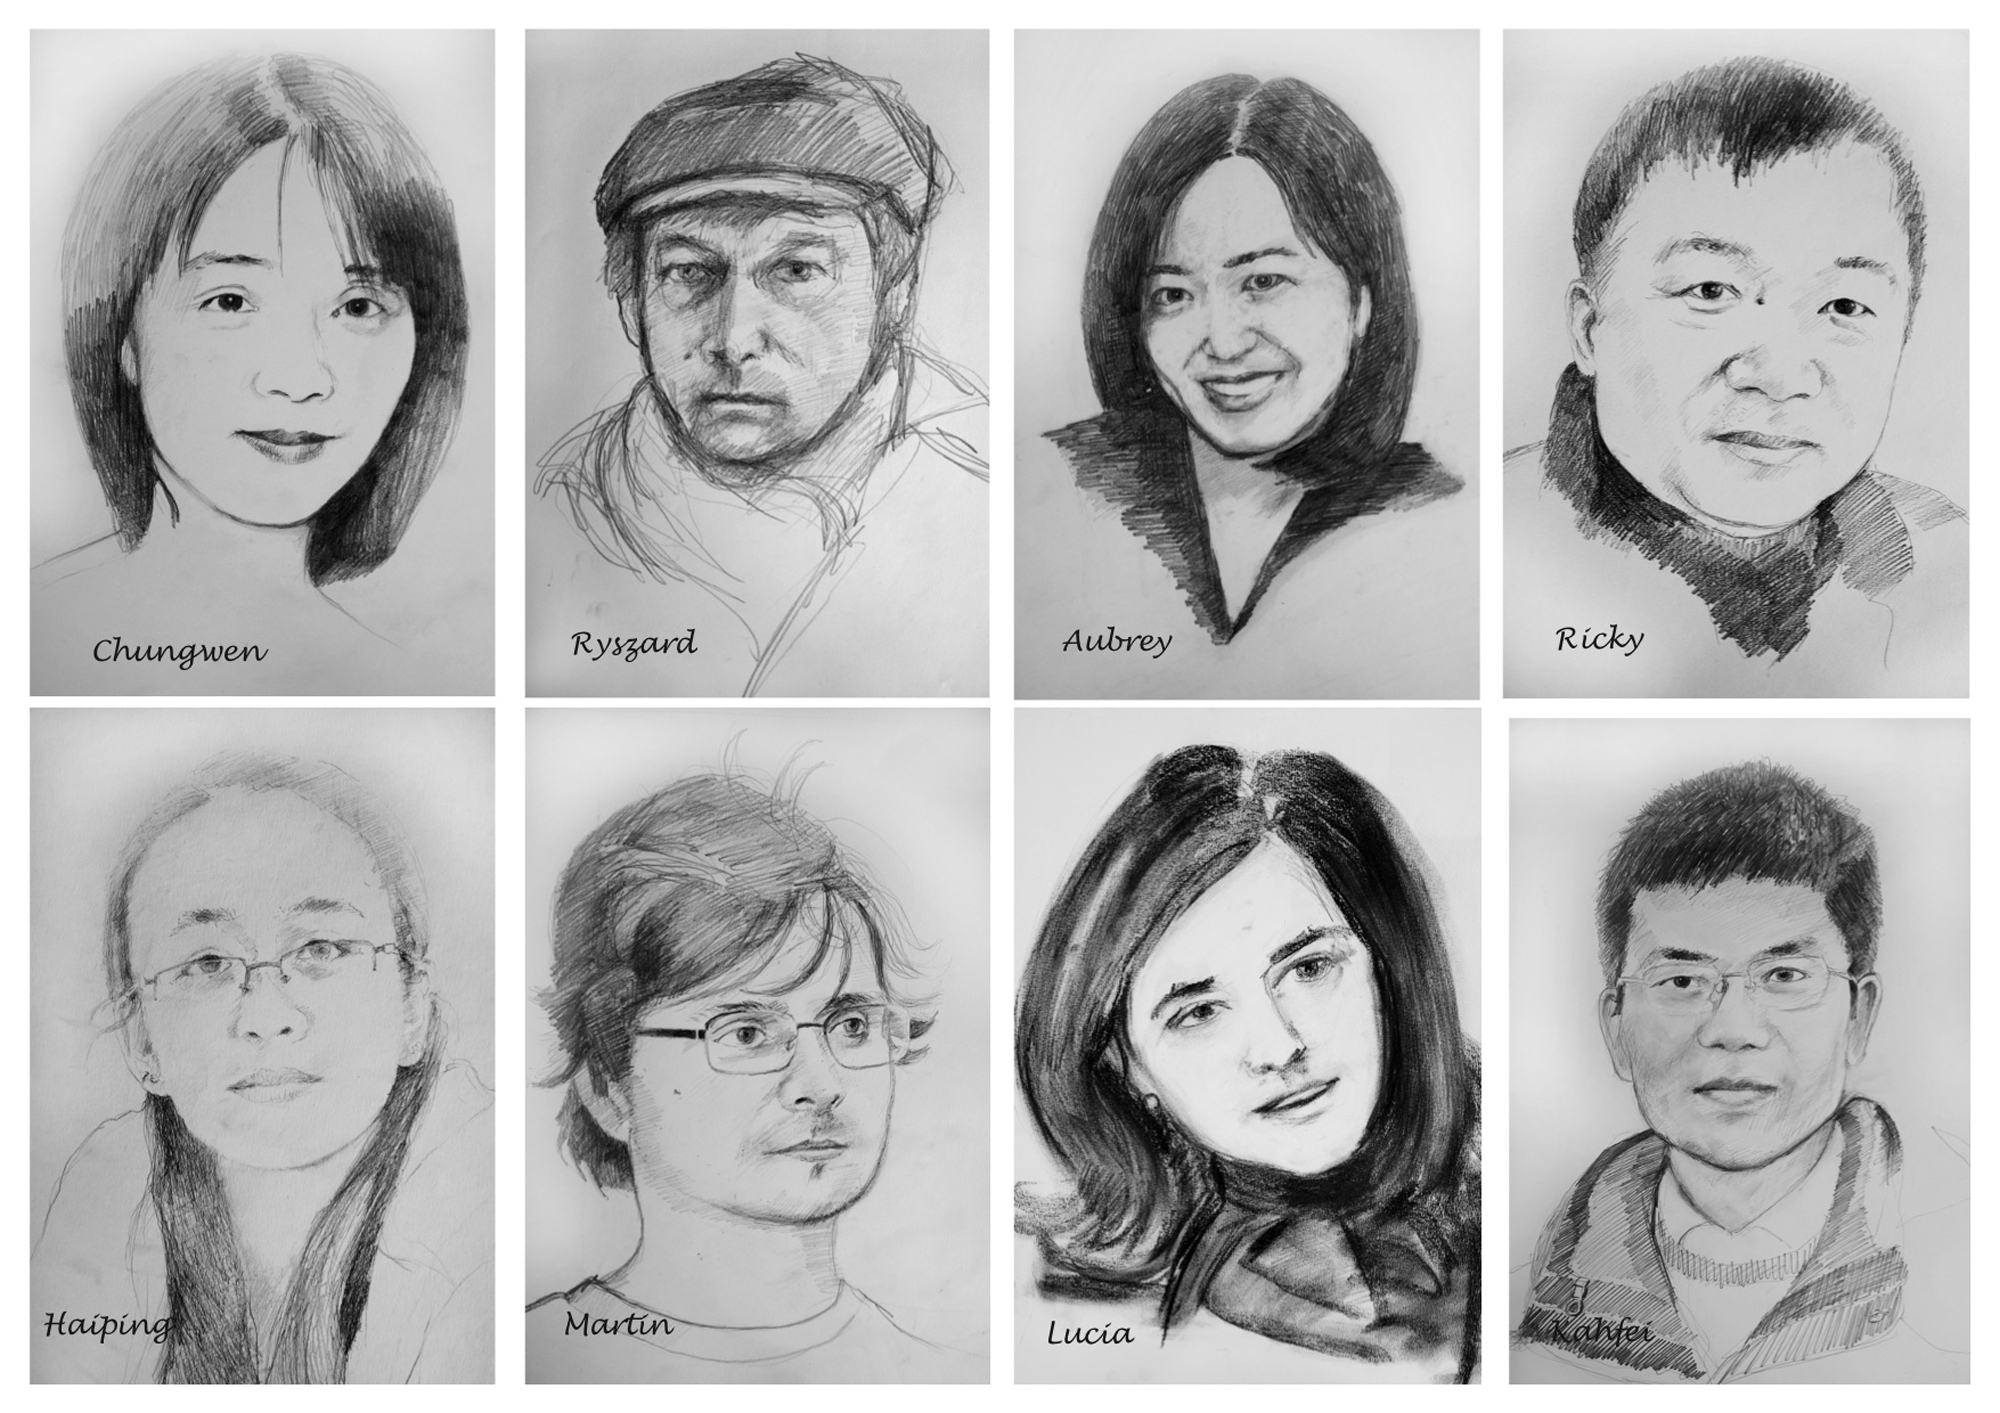 Pencil sketches of the 8 members of the Chinese footprints project team:
Chungwen
Ryszard
Aubrey
Ricky
Haiping
Martin
Lucia
Kahfei